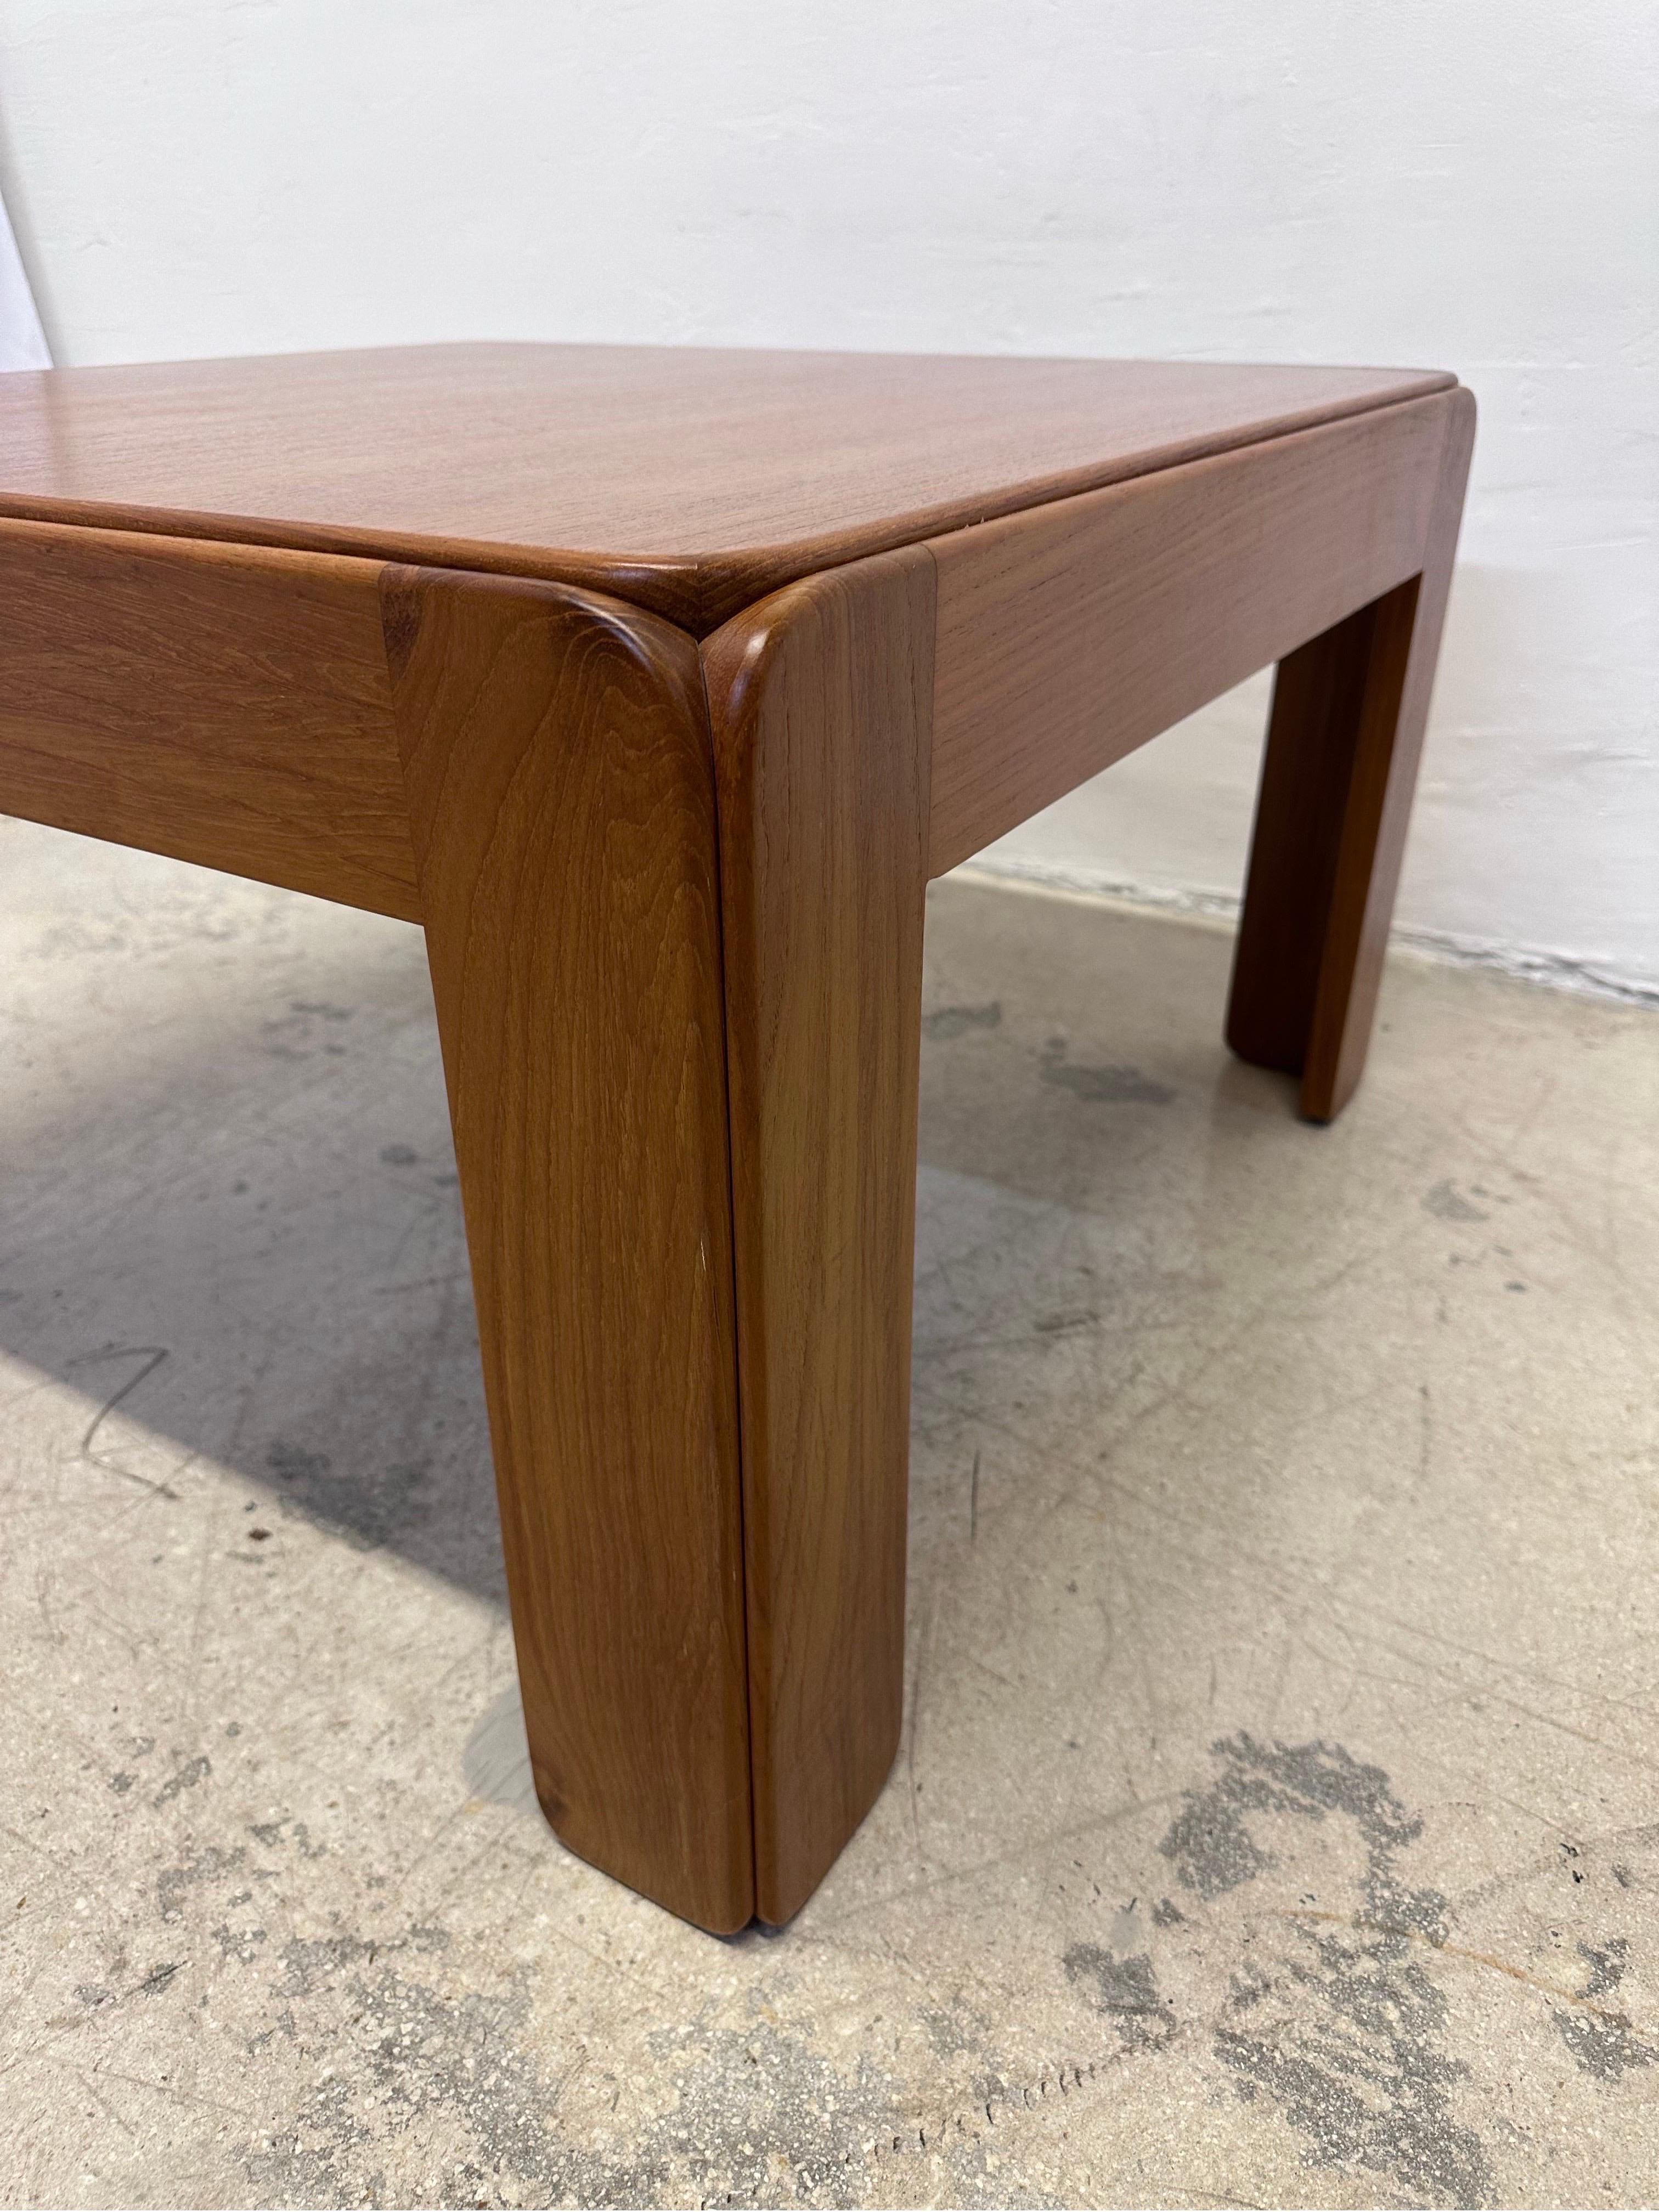 Illum Wikkelso Danish Modern Wood Coffee or Side Table for Niels Eilersen, 1960s For Sale 1